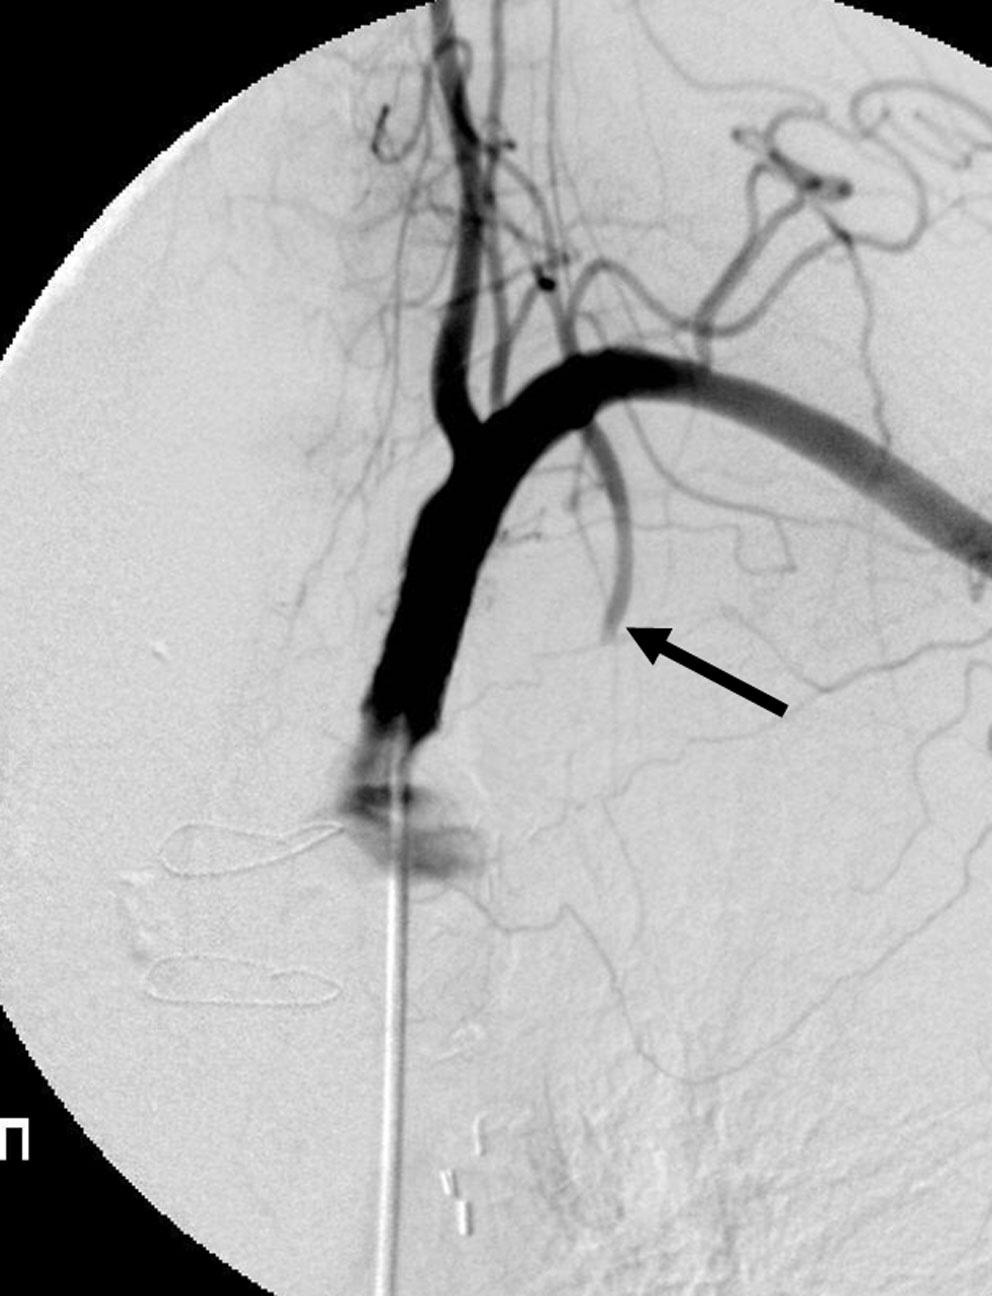 . rteriogram obtained after placement of a stent shows improved subclavian stenosis, but stagnation of contrast media in the proximal left internal